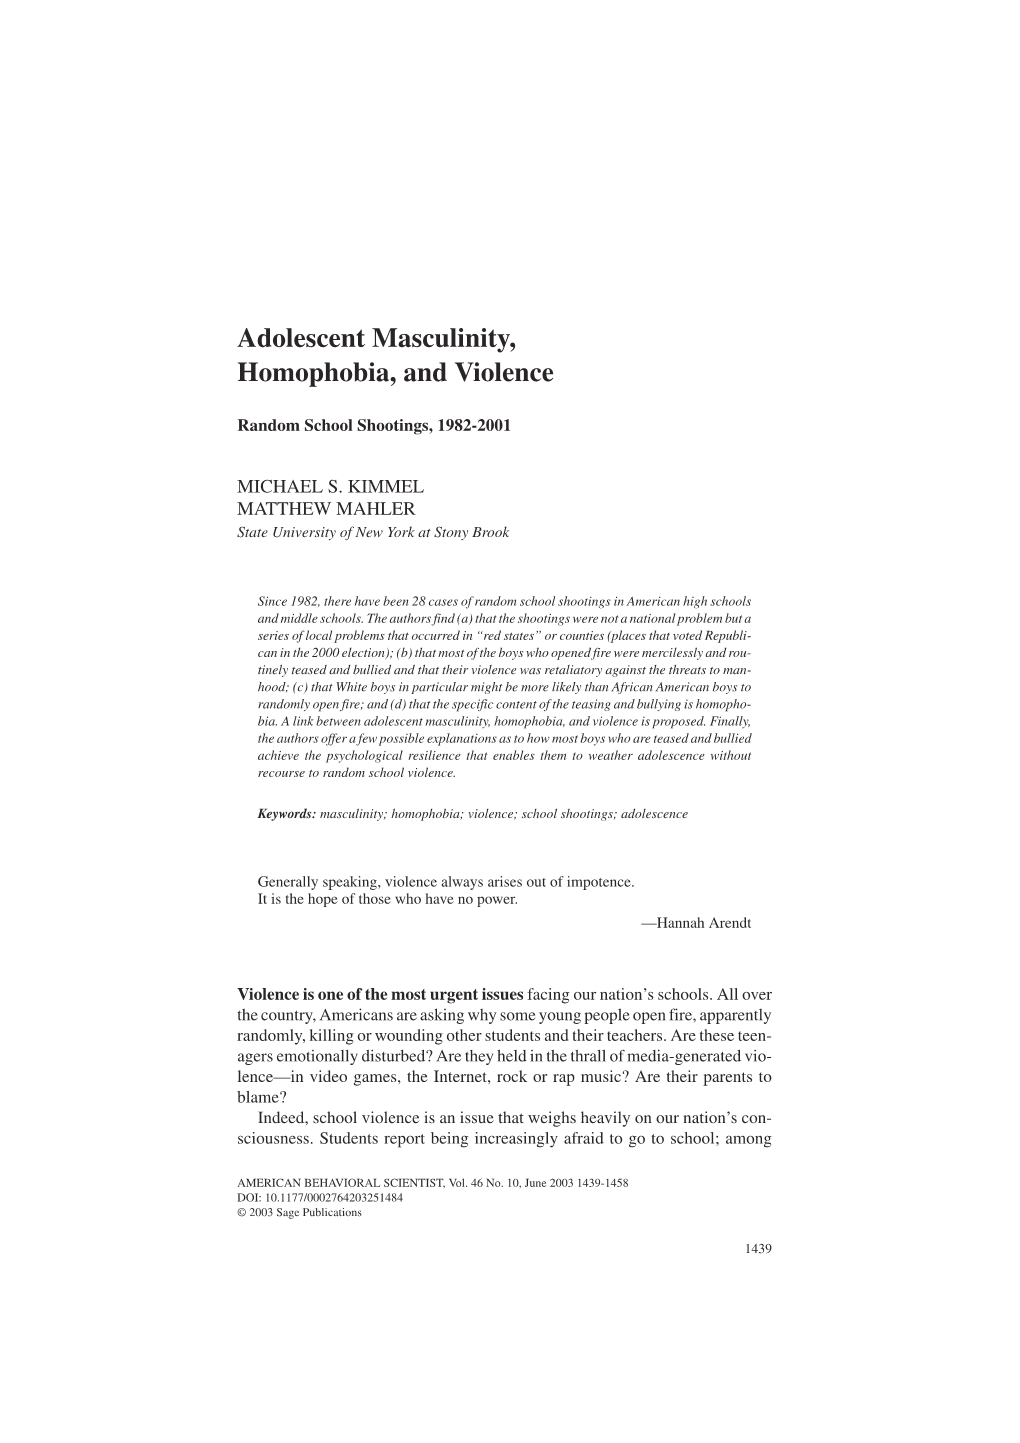 Adolescent Masculinity, Homophobia, and Violence